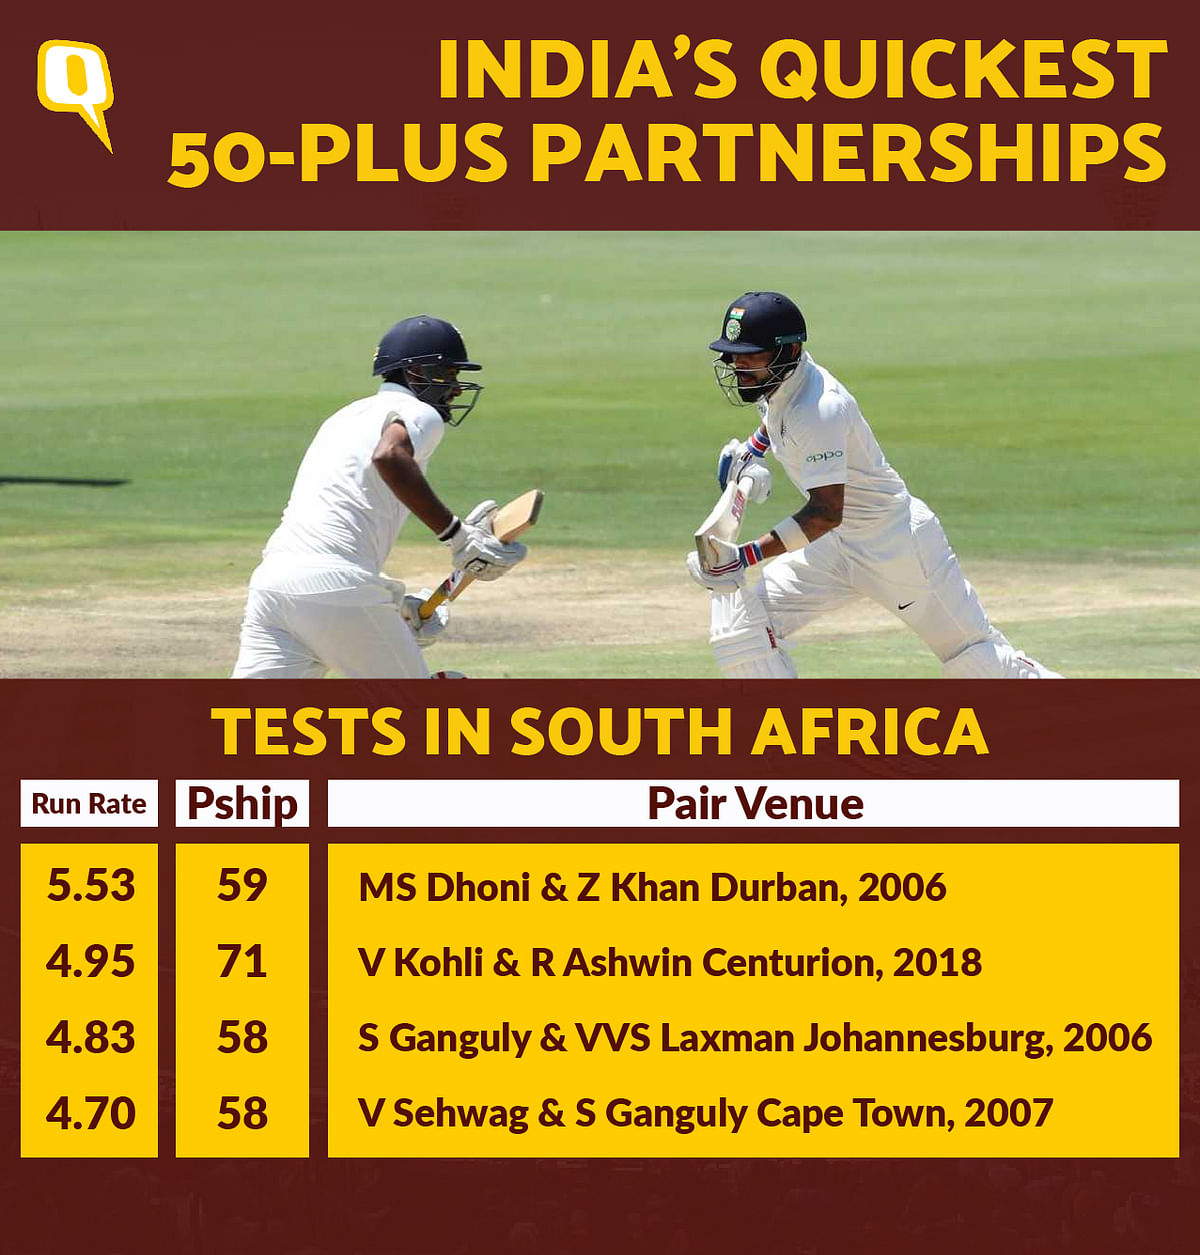 Virat Kohli became the second Indian cricketer to score two centuries in South Africa, the first was Sachin.